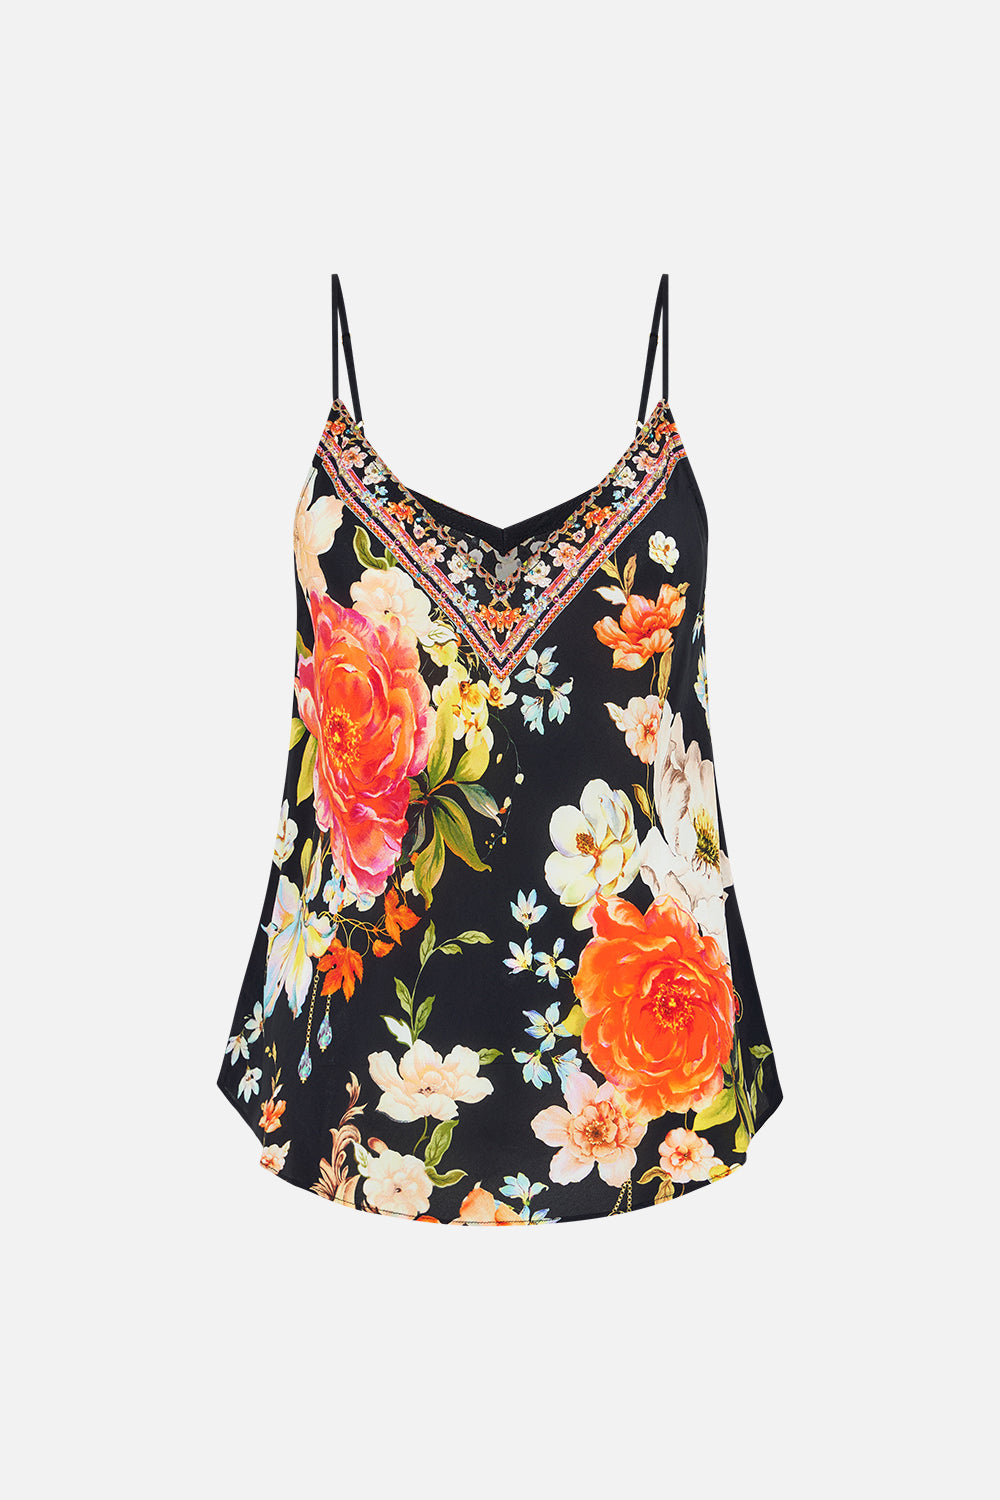 Product view of CAMILLA floral silk cami in Secret History print